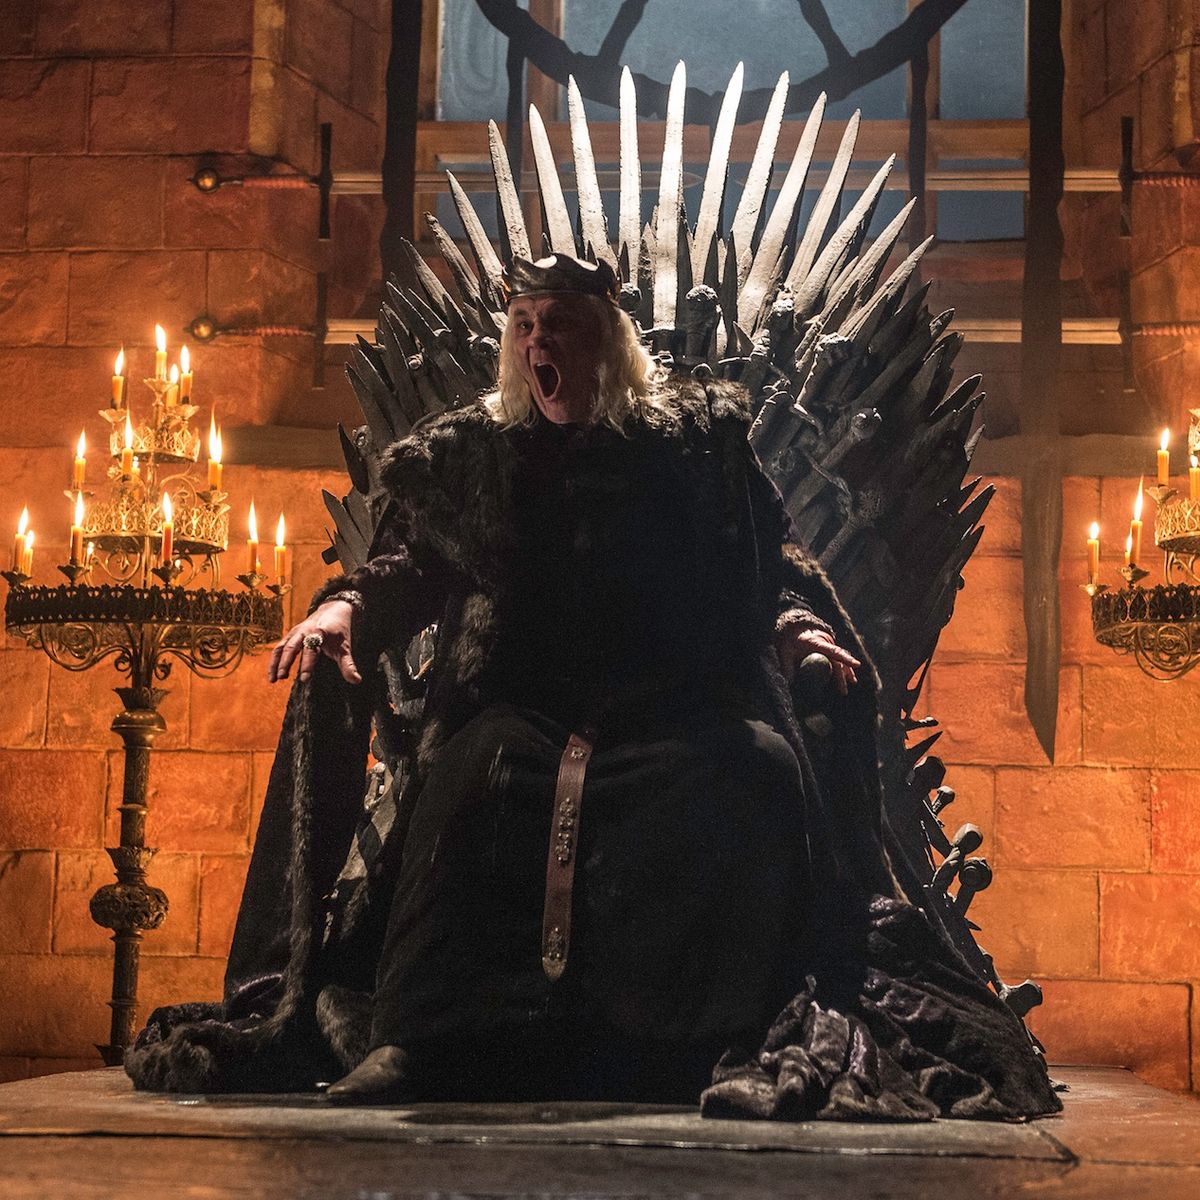 Game Of Thrones Timeline Explained With House Of The Dragons Falling  Perfectly In Sync - From 'First Men' In Westeros To The Mad King